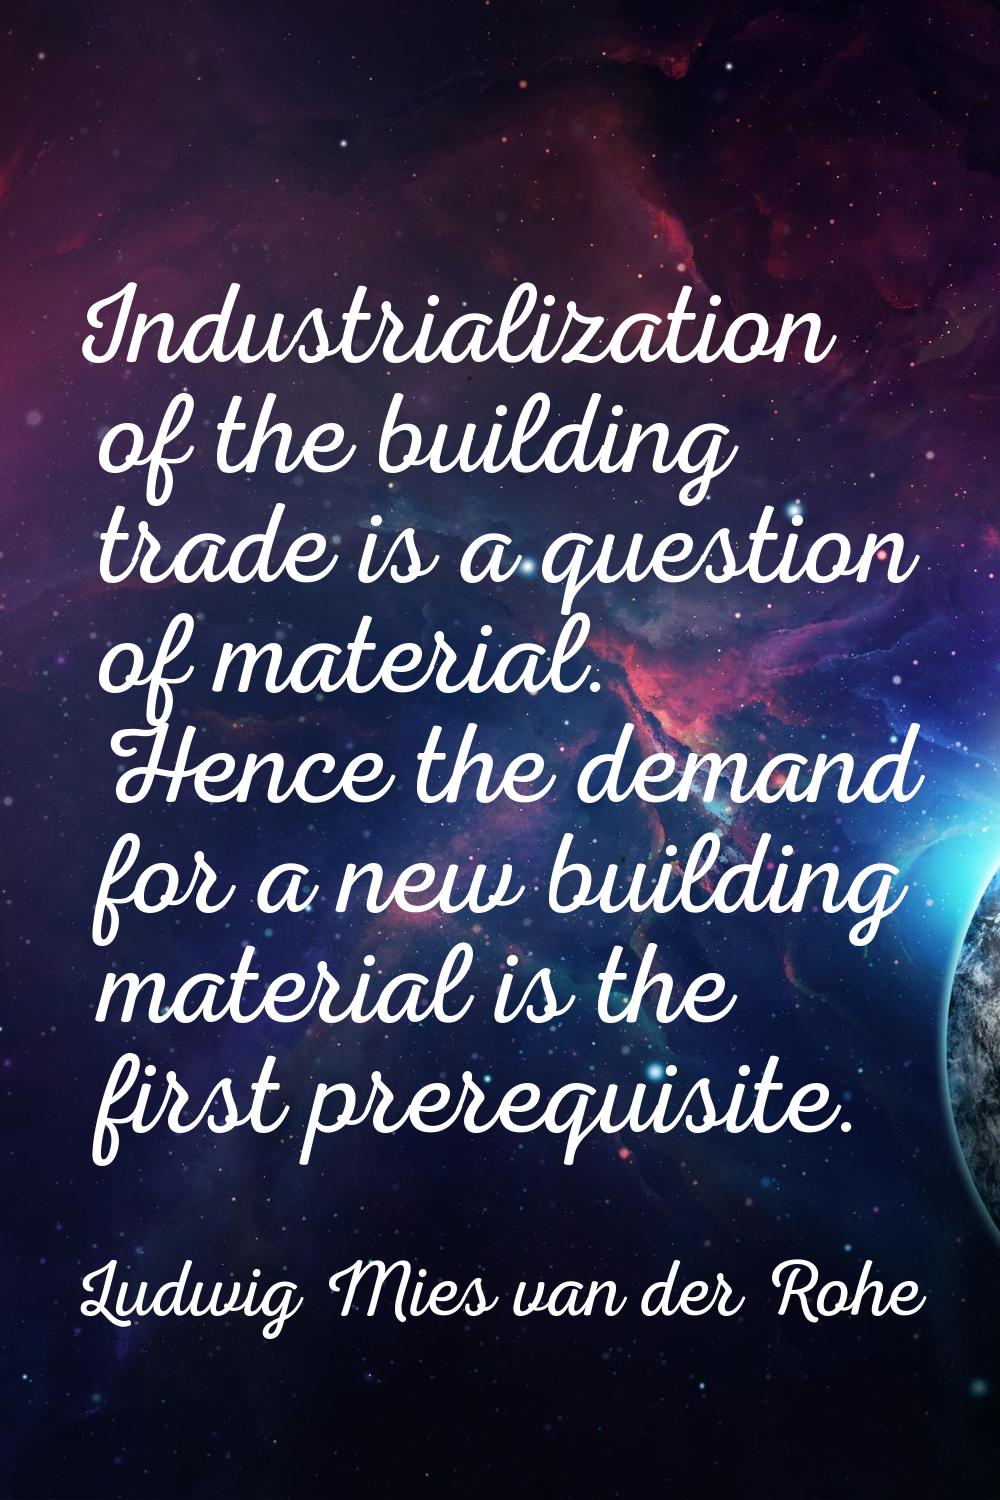 Industrialization of the building trade is a question of material. Hence the demand for a new build